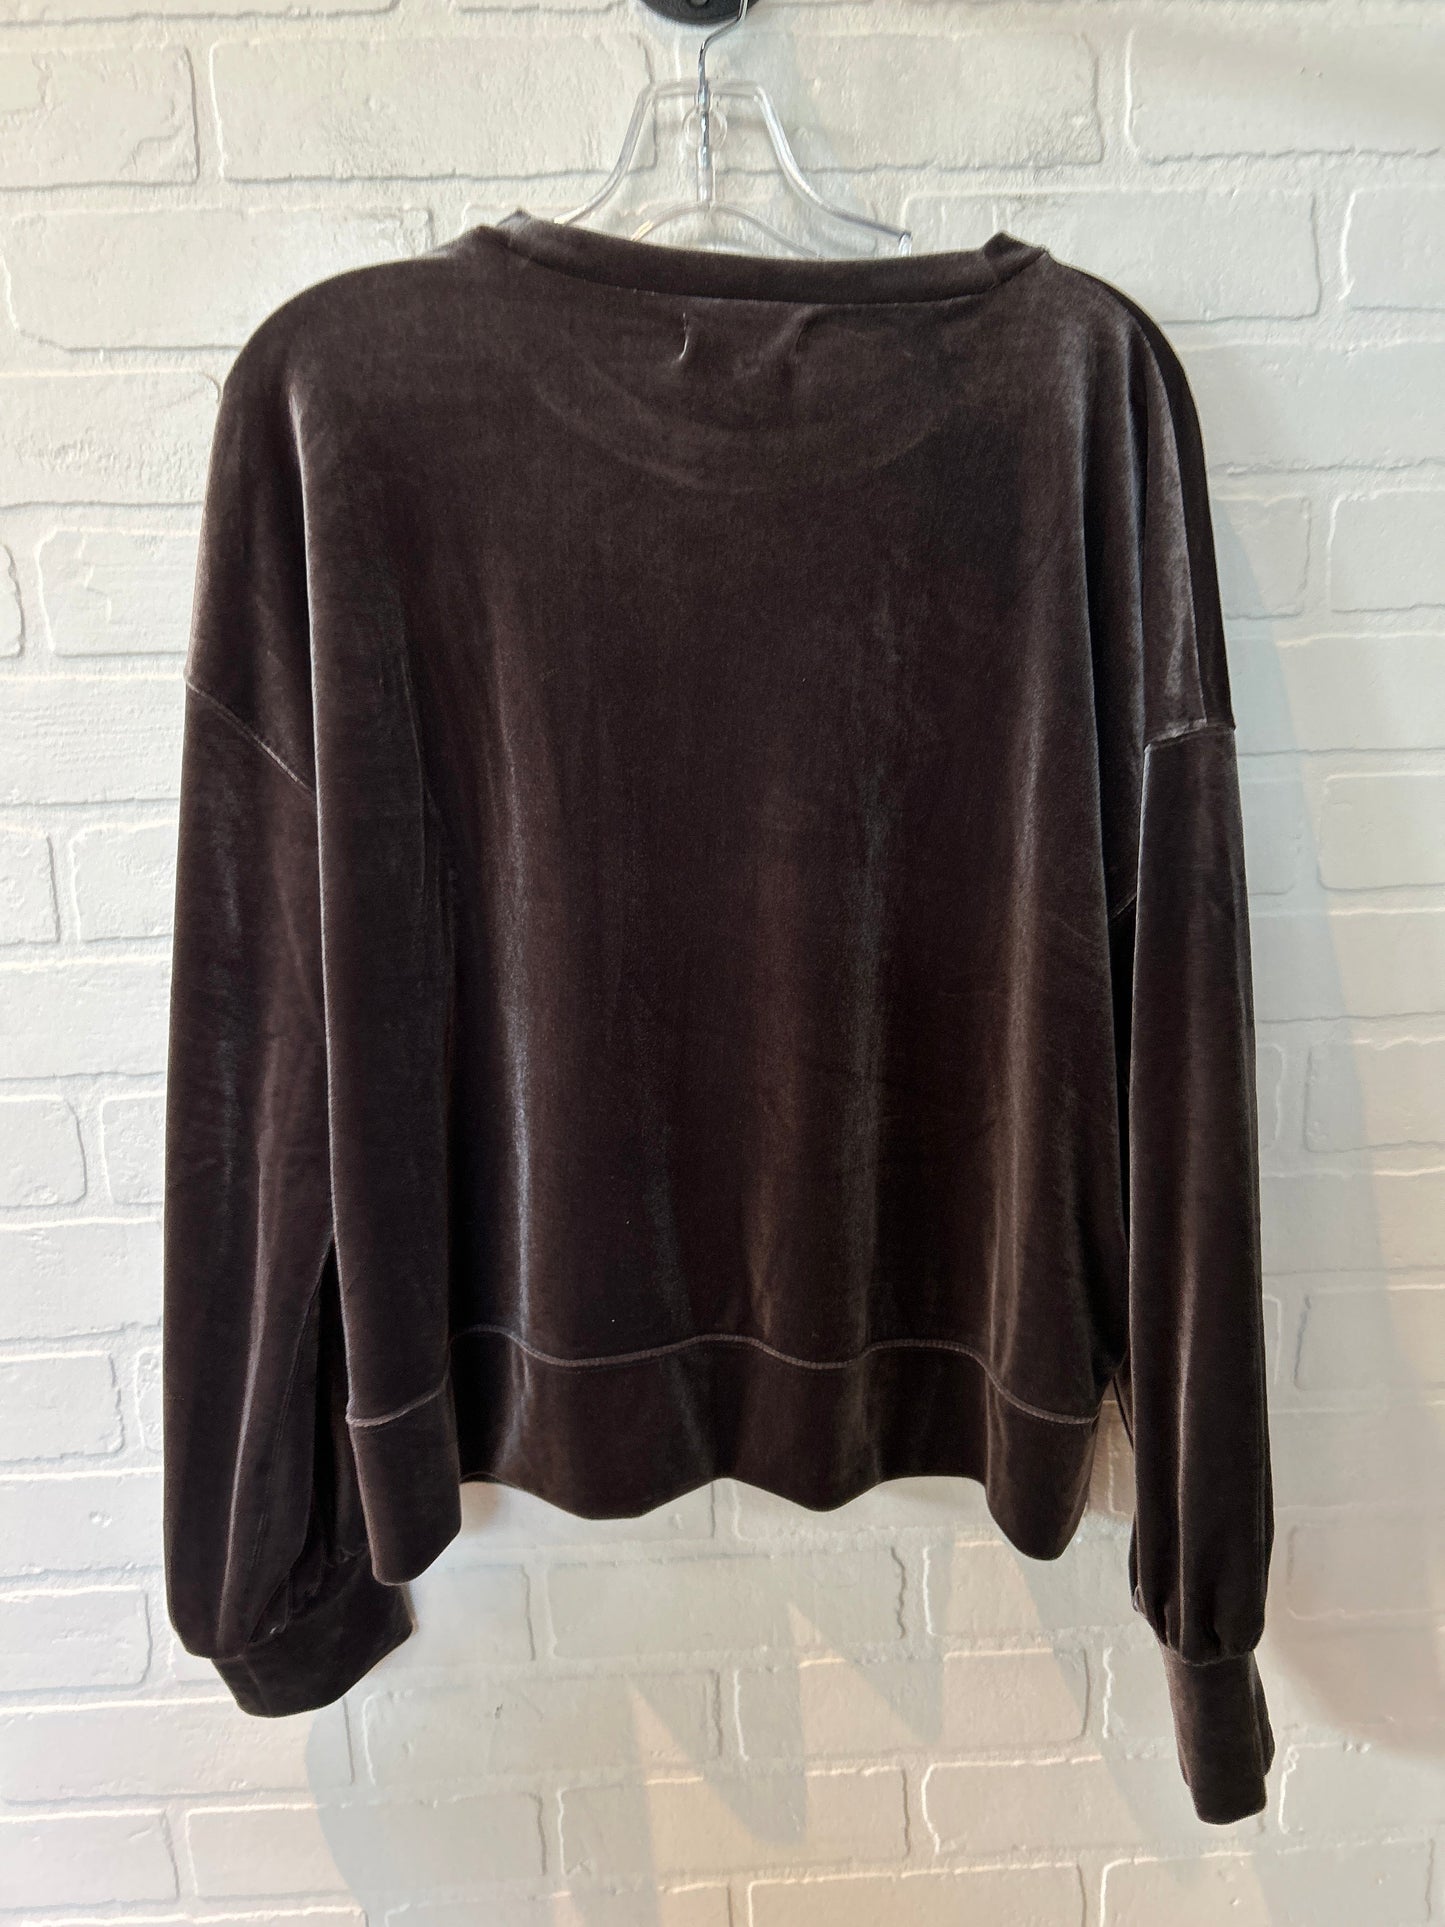 Brown Top Long Sleeve Madewell, Size L